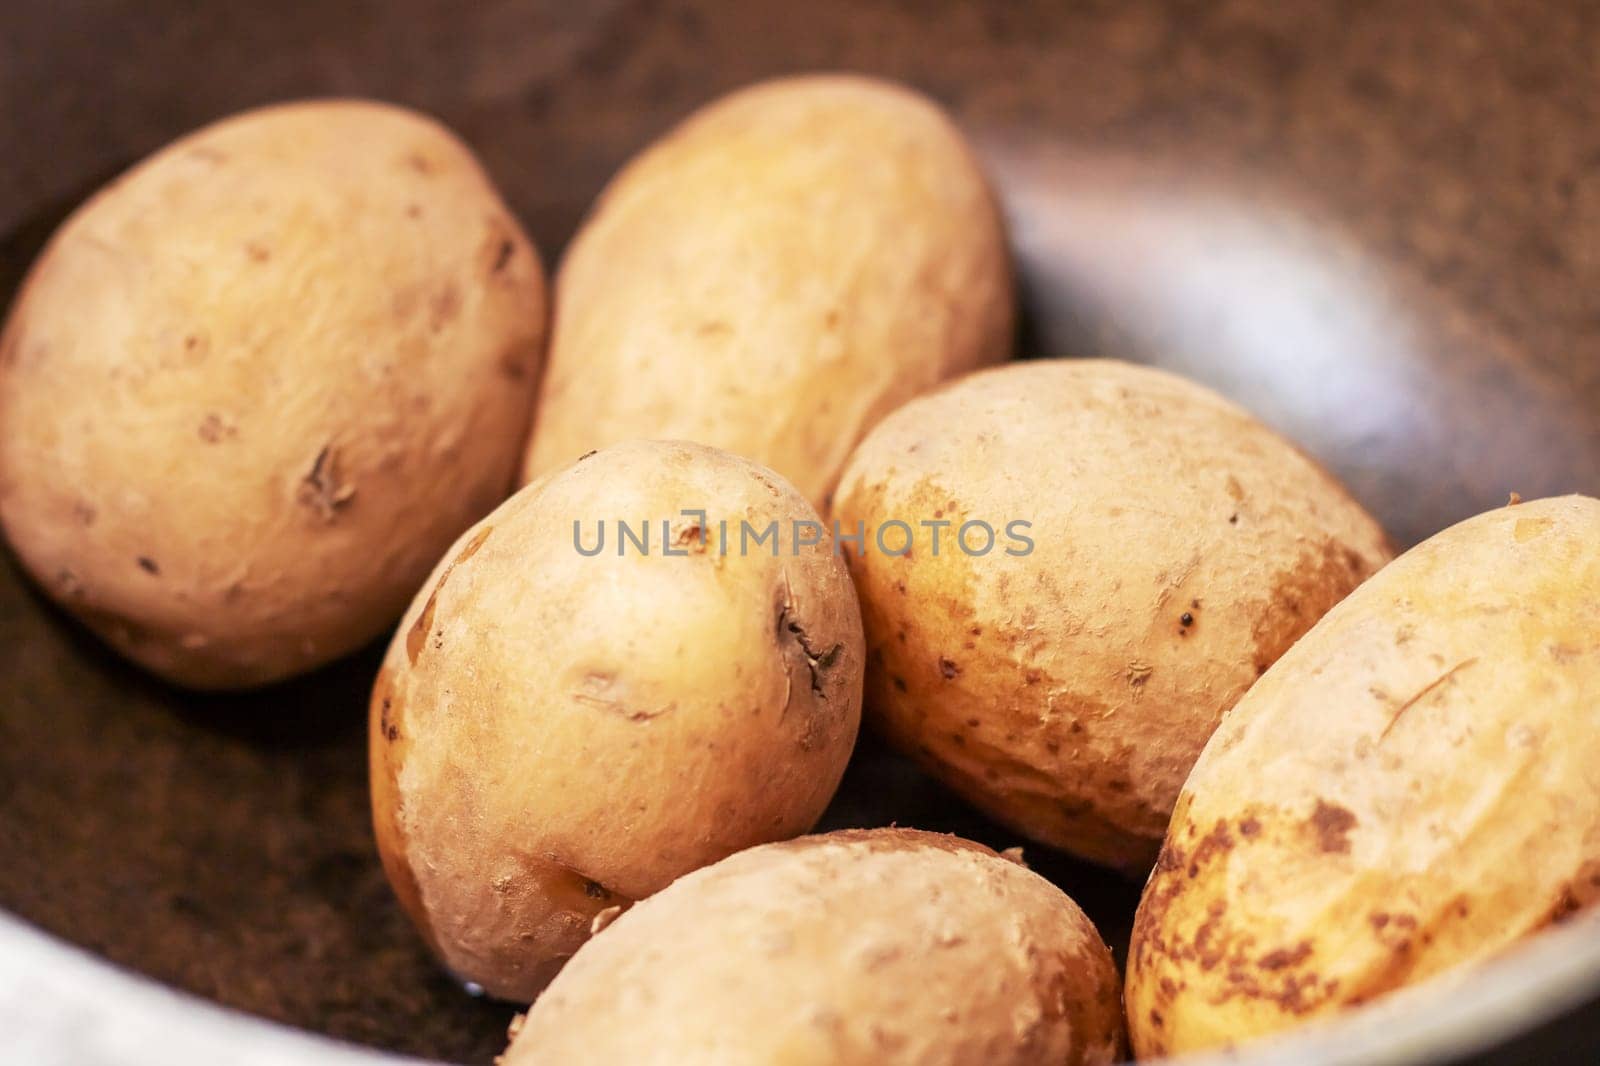 Potatoes, a staple food, are being cooked in a pan with water. These root vegetables are a natural food ingredient used in various cuisines